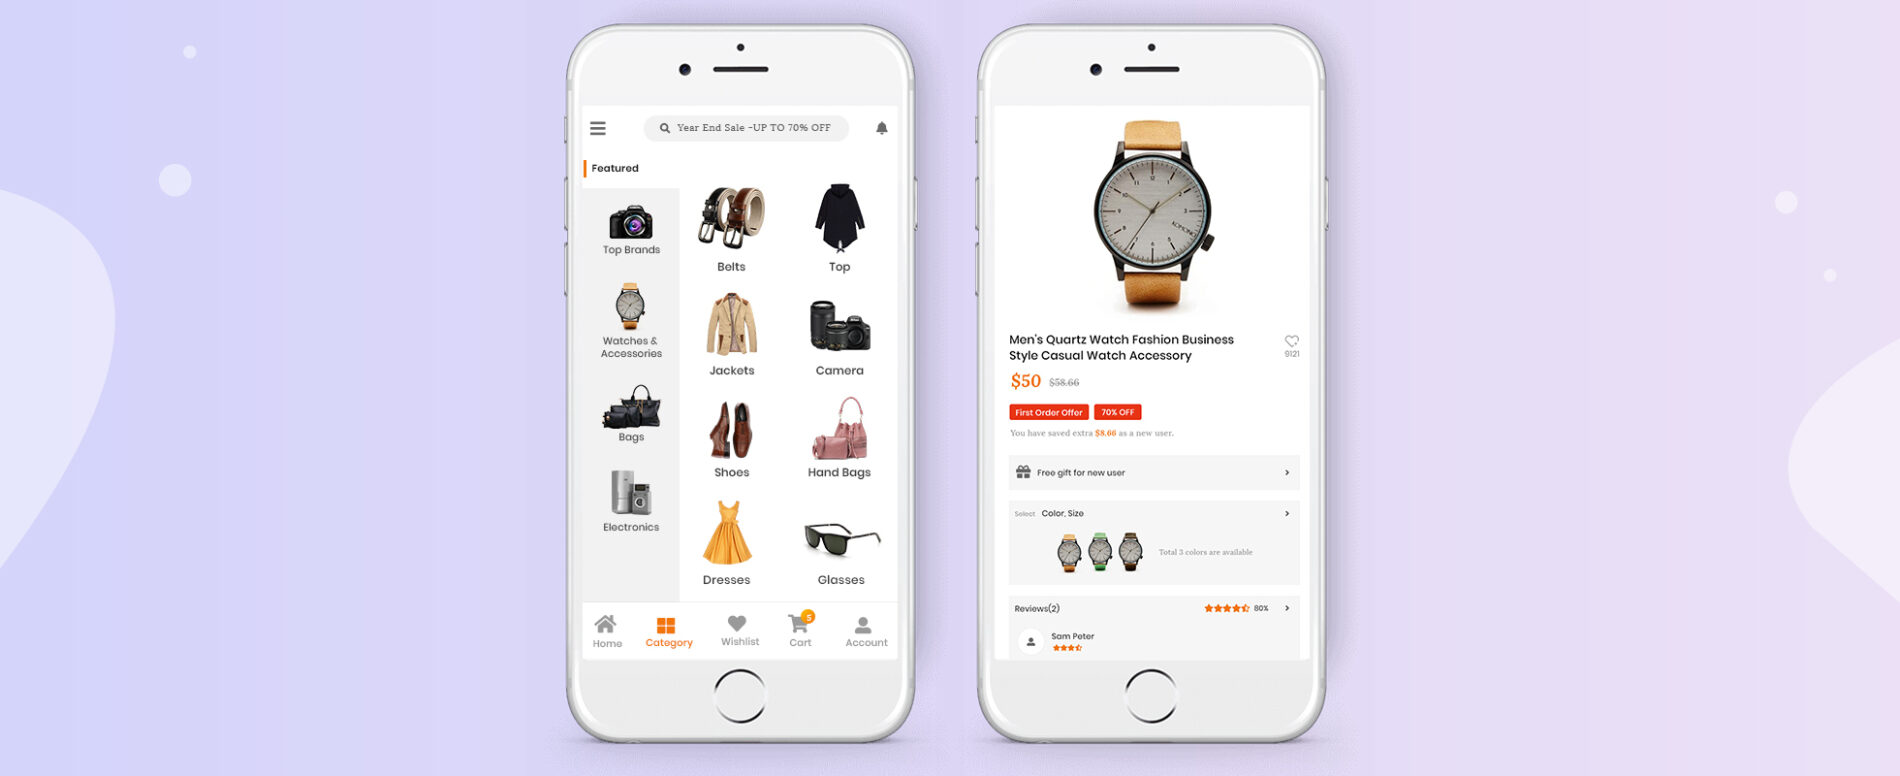 Product page on eCommerce Mobile App